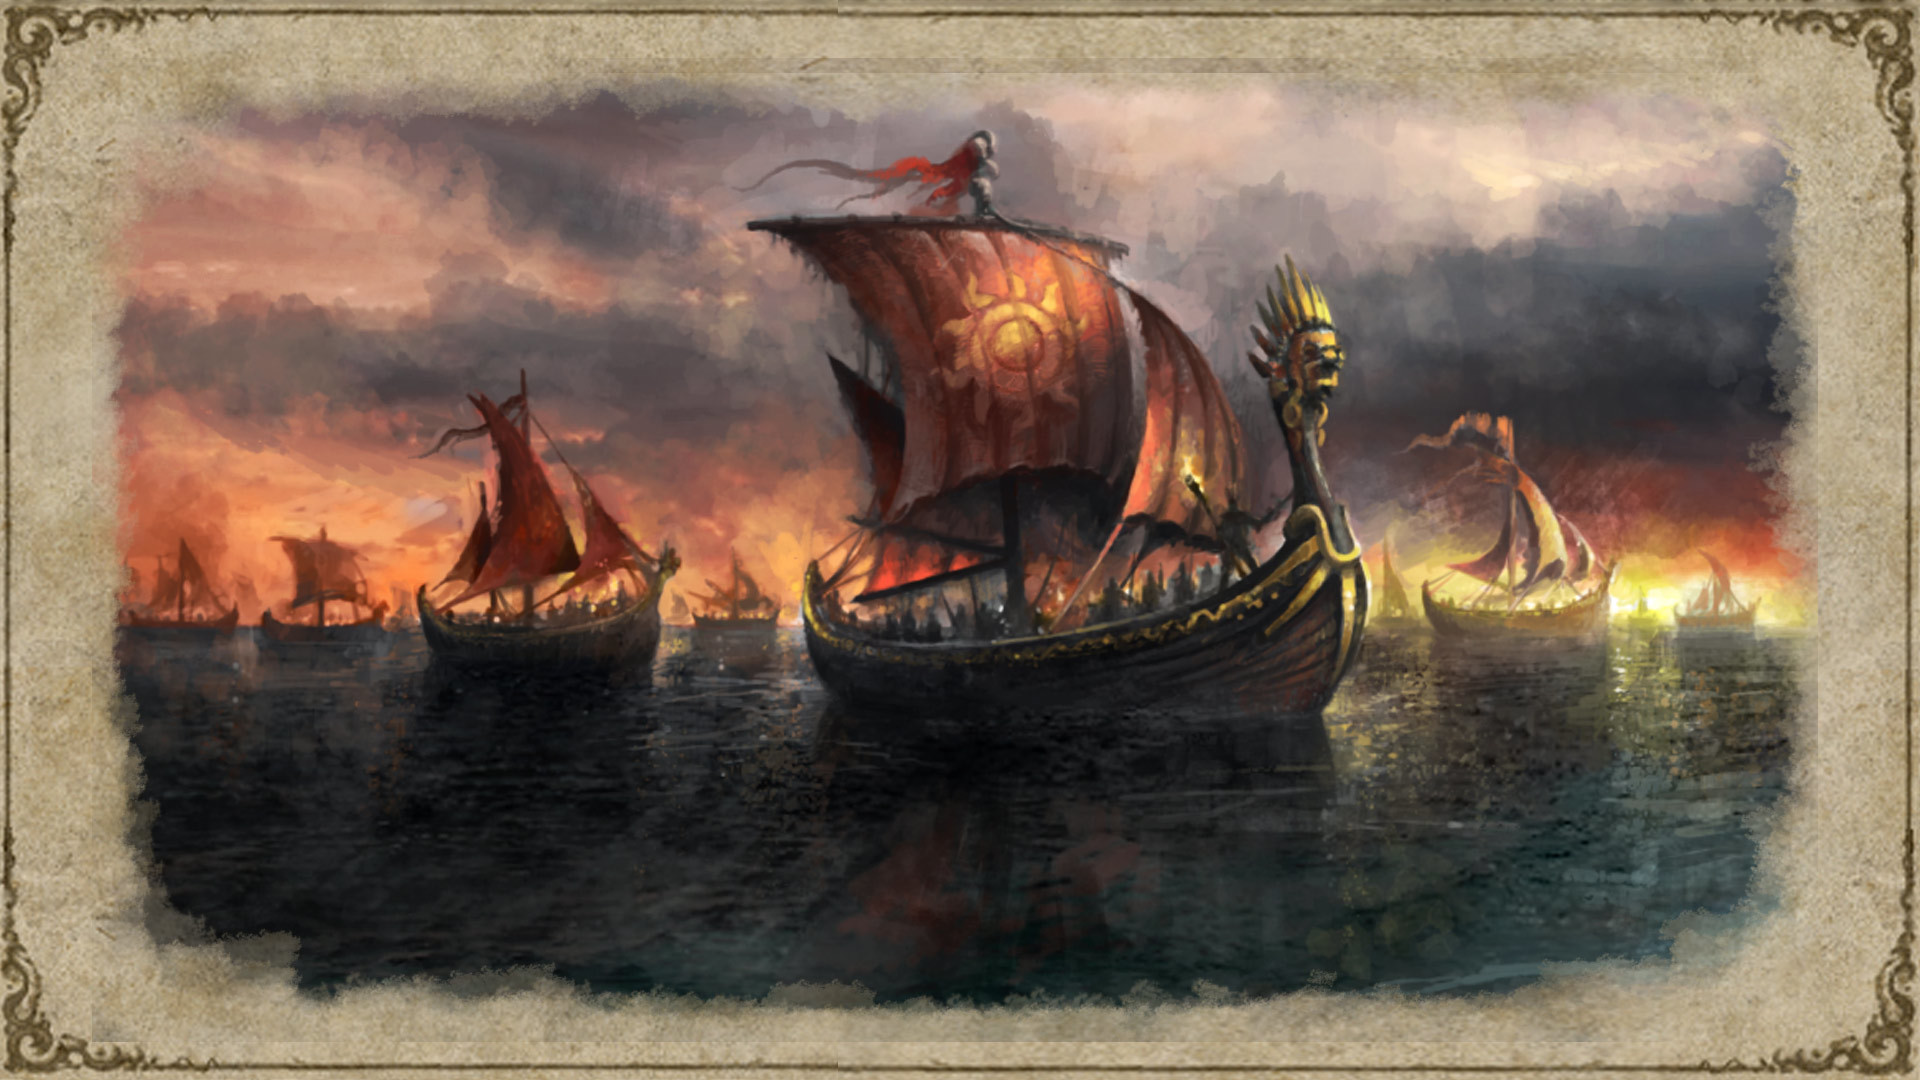 1920x1080 Crusader Kings II - The Sunset Invasion | Steam Trading Cards Wiki | FANDOM  powered by Wikia